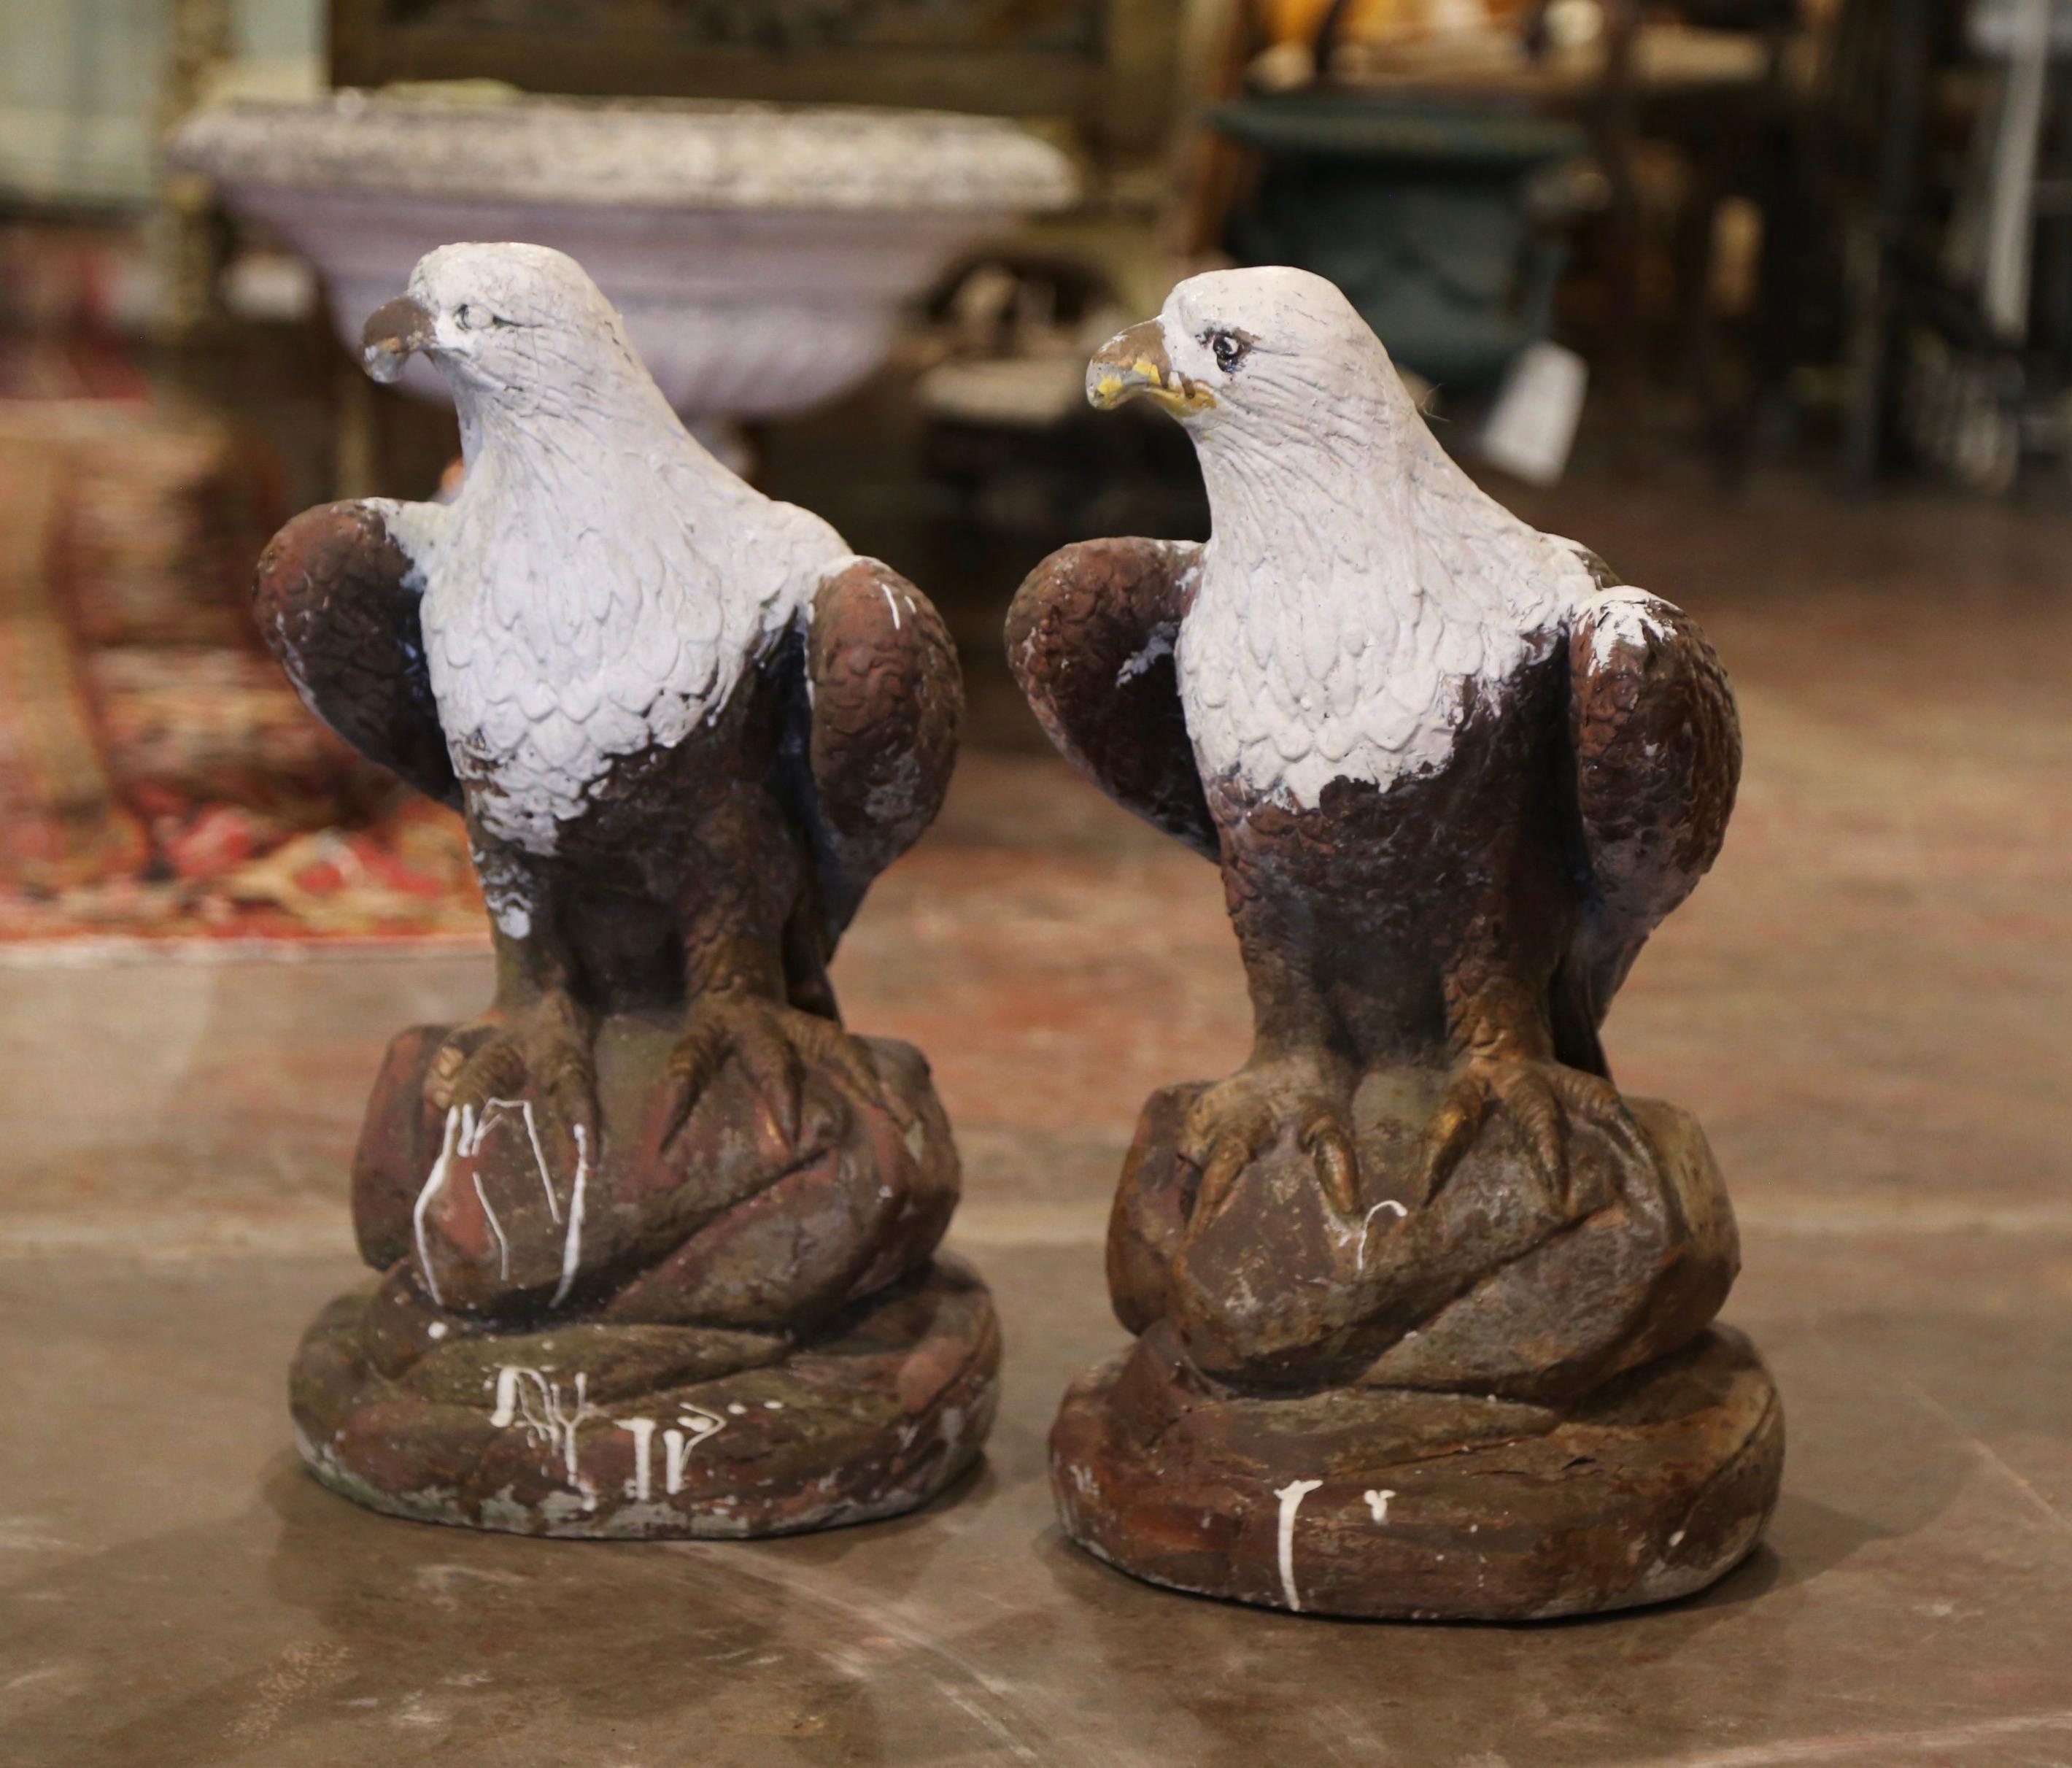 These Classic bird sculptures were crafted in France, circa 1980. The stately, vintage eagles are perched on a rounded rocky base. The sculpted birds have a weathered patinated and painted finish and could be used inside or outside, perhaps on